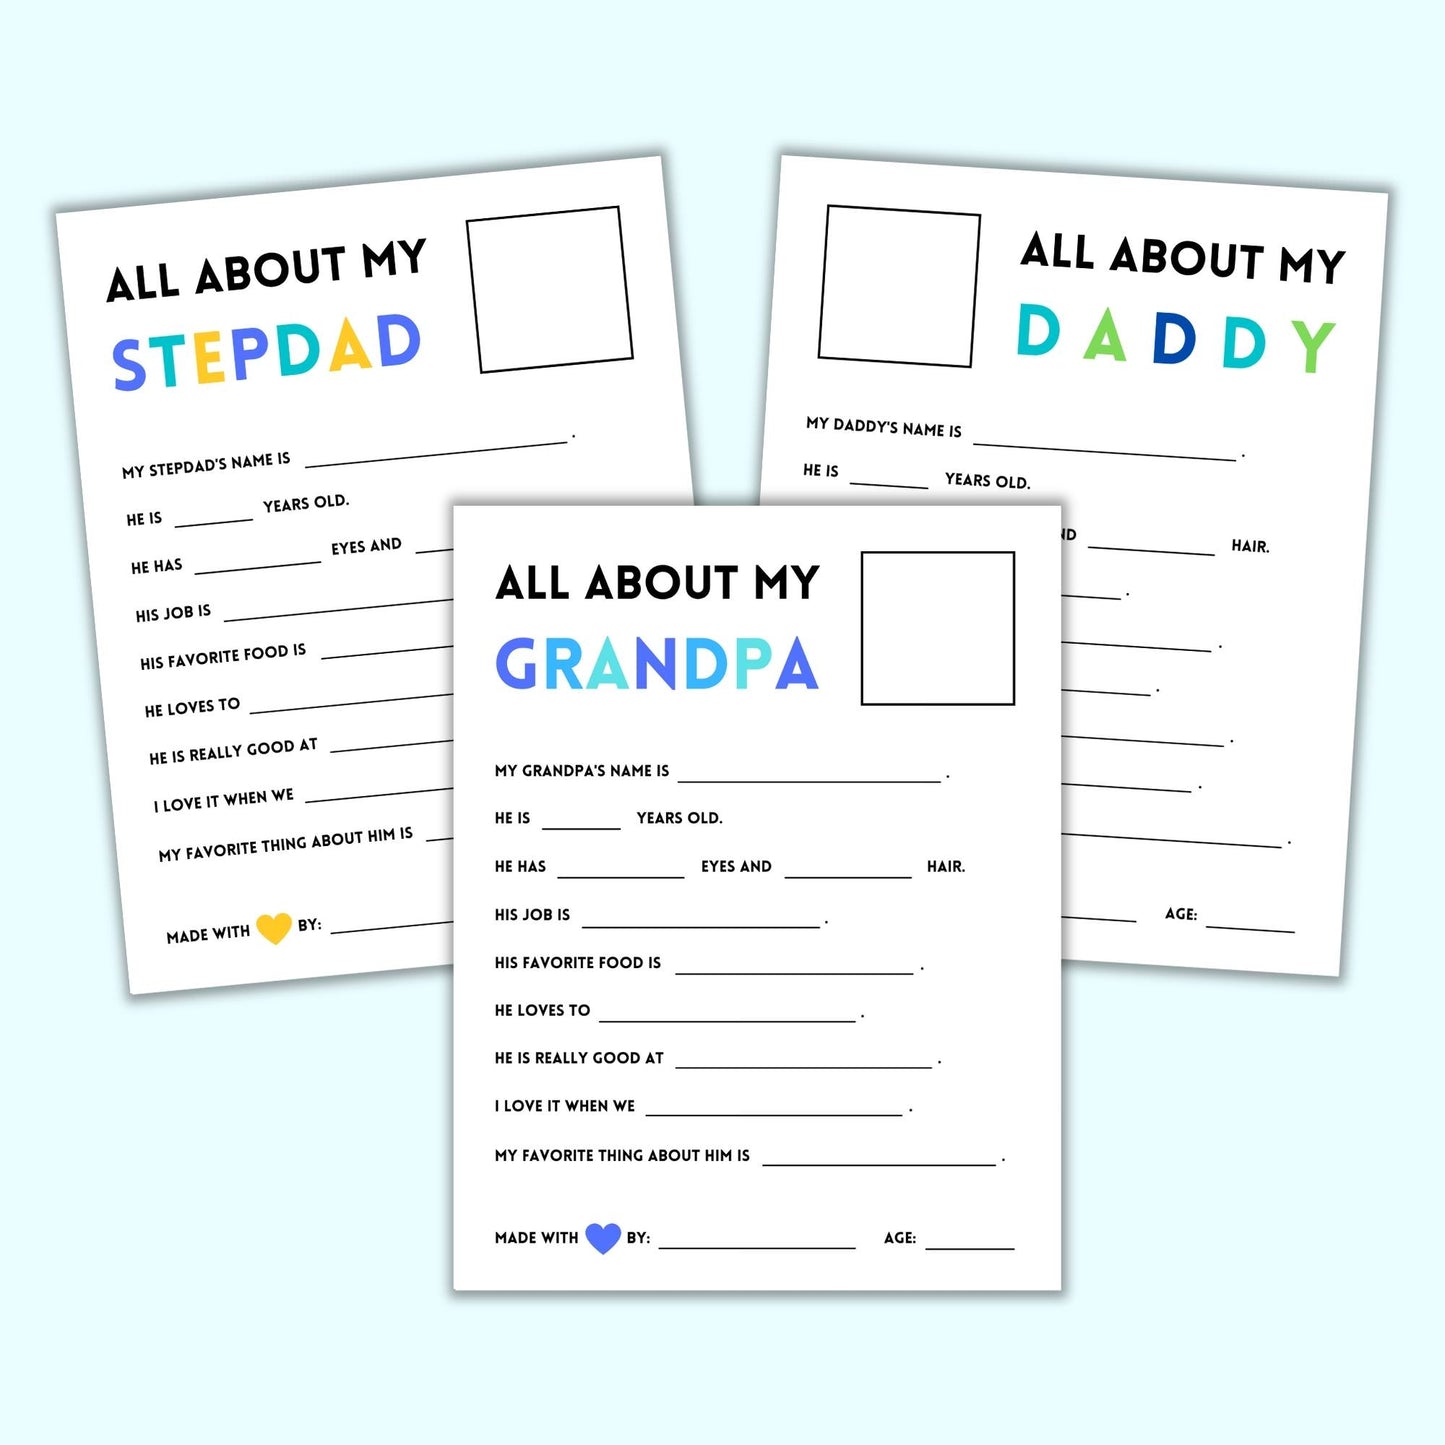 "All About My Family" Bundle (13 Questionnaires)